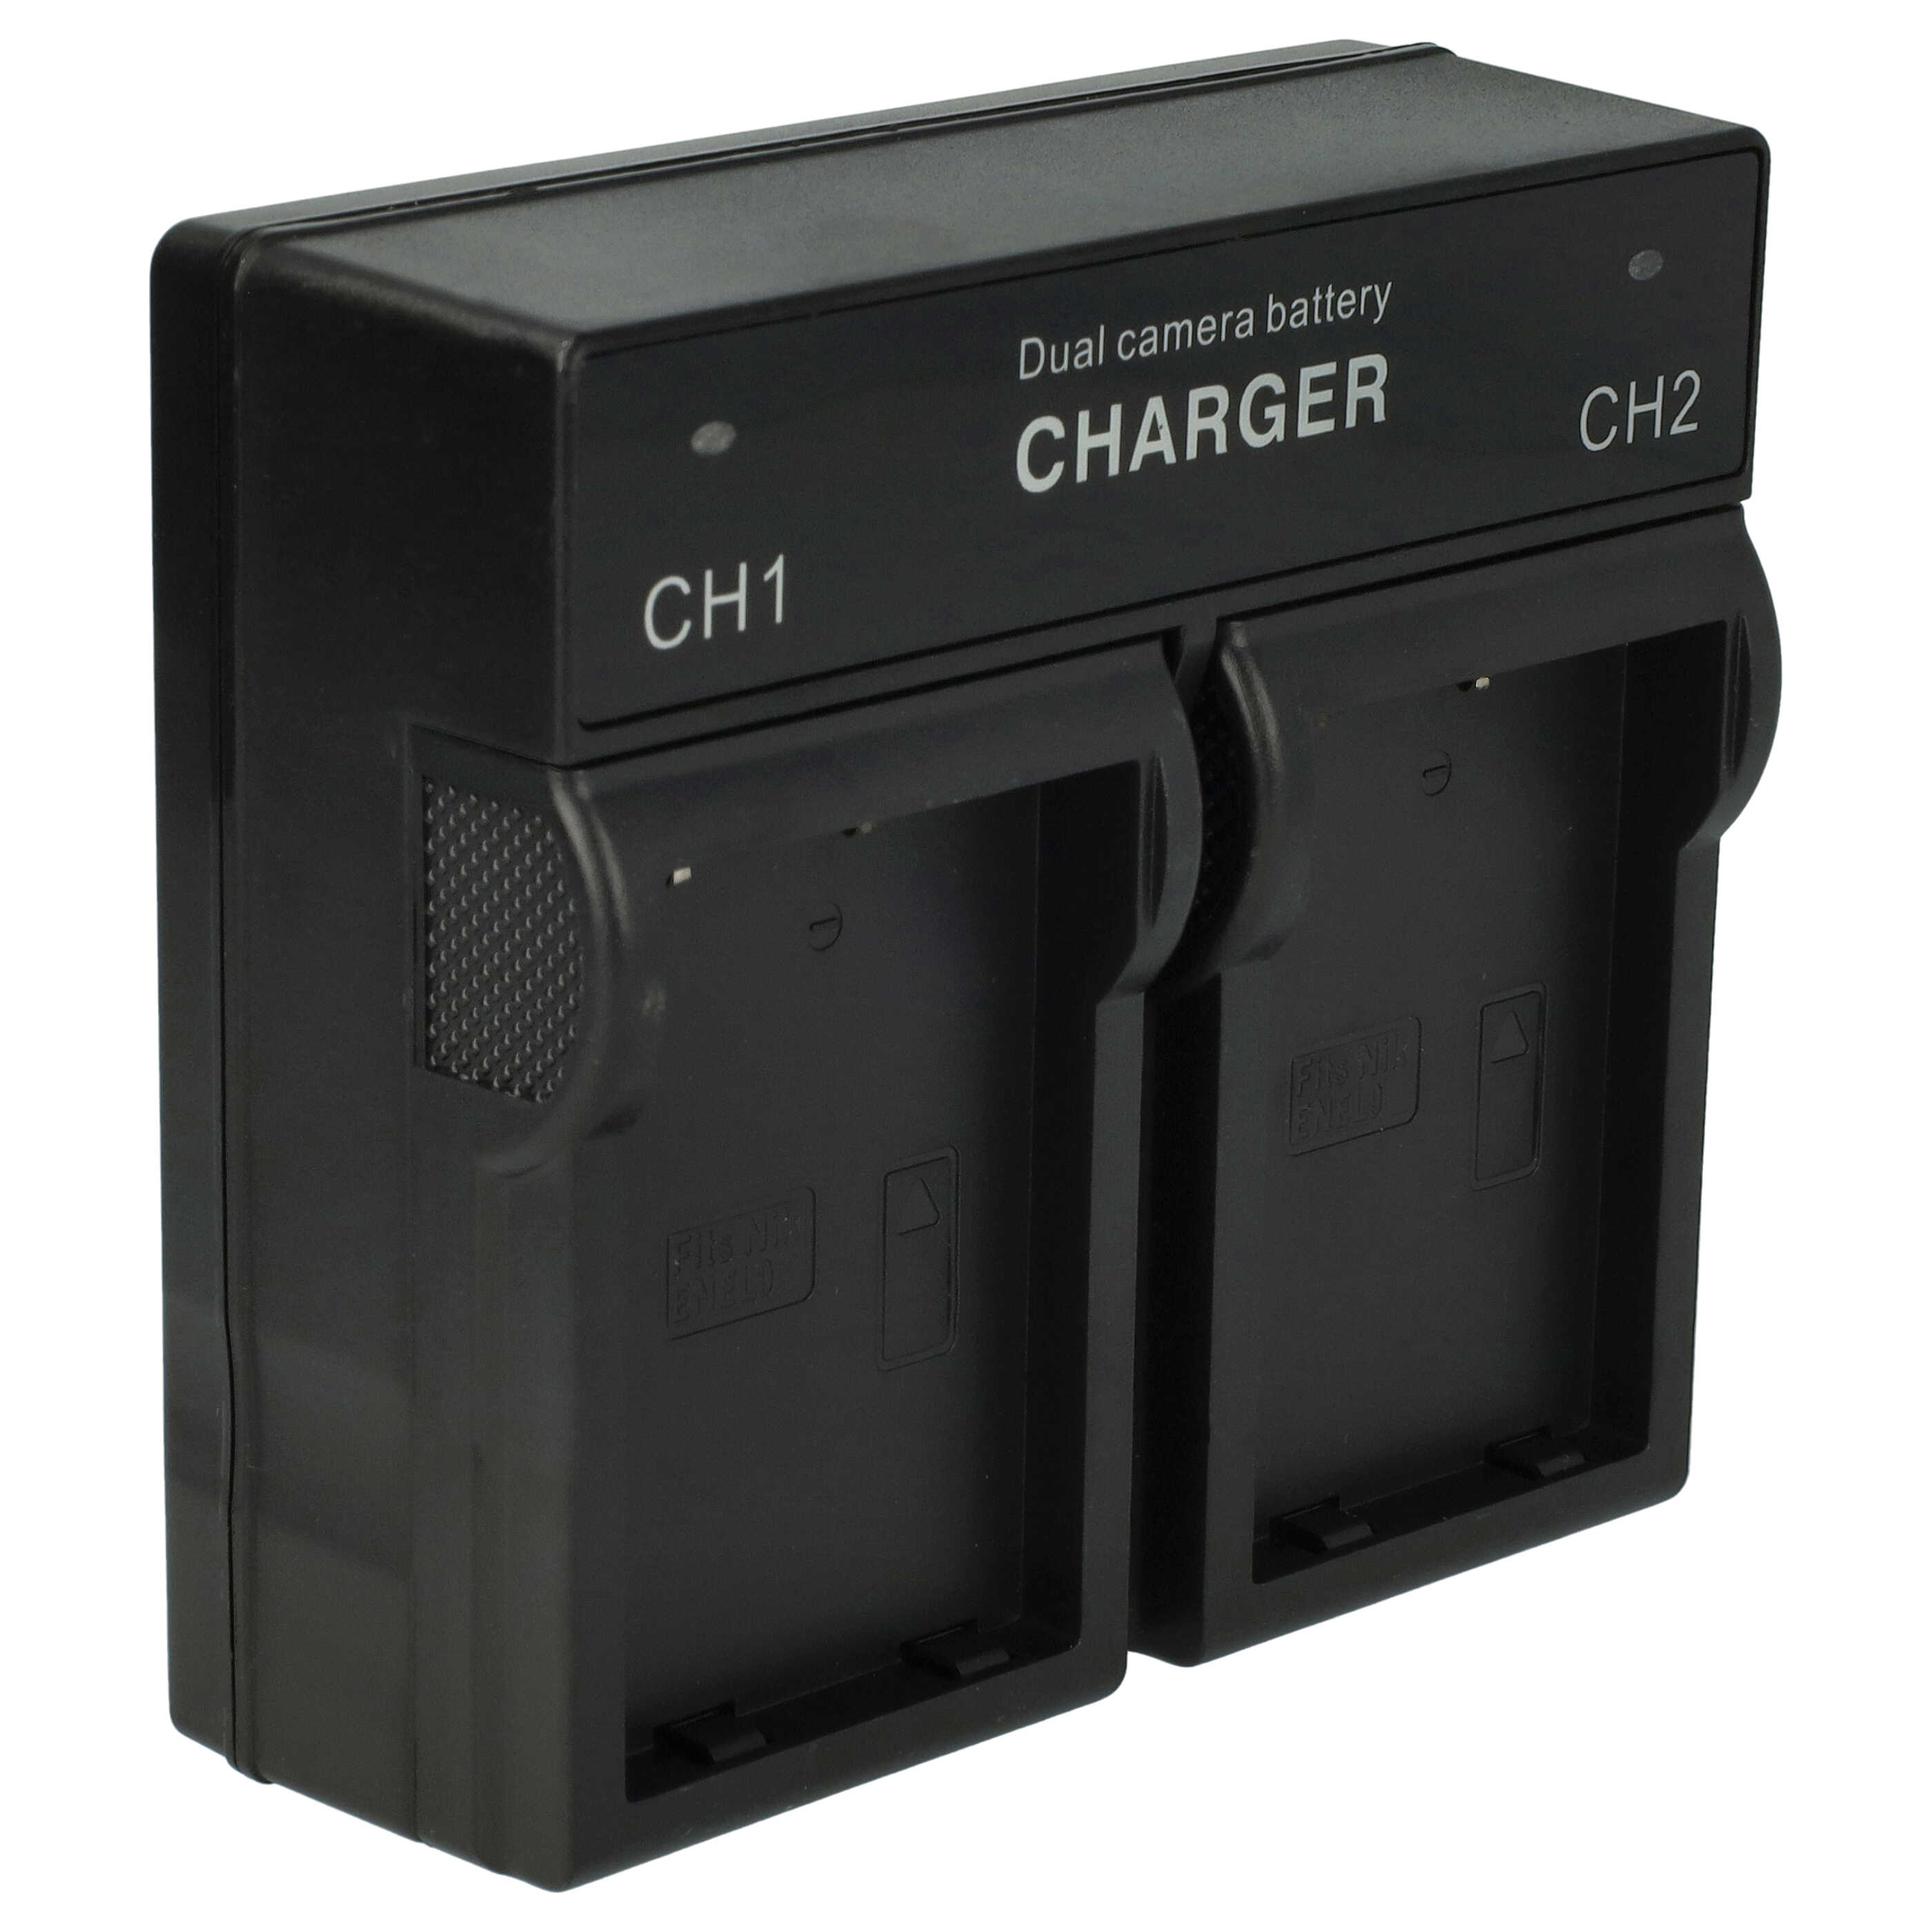 Battery Charger suitable for D3000 Camera etc. - 0.5 / 0.9 A, 4.2 / 8.4 V